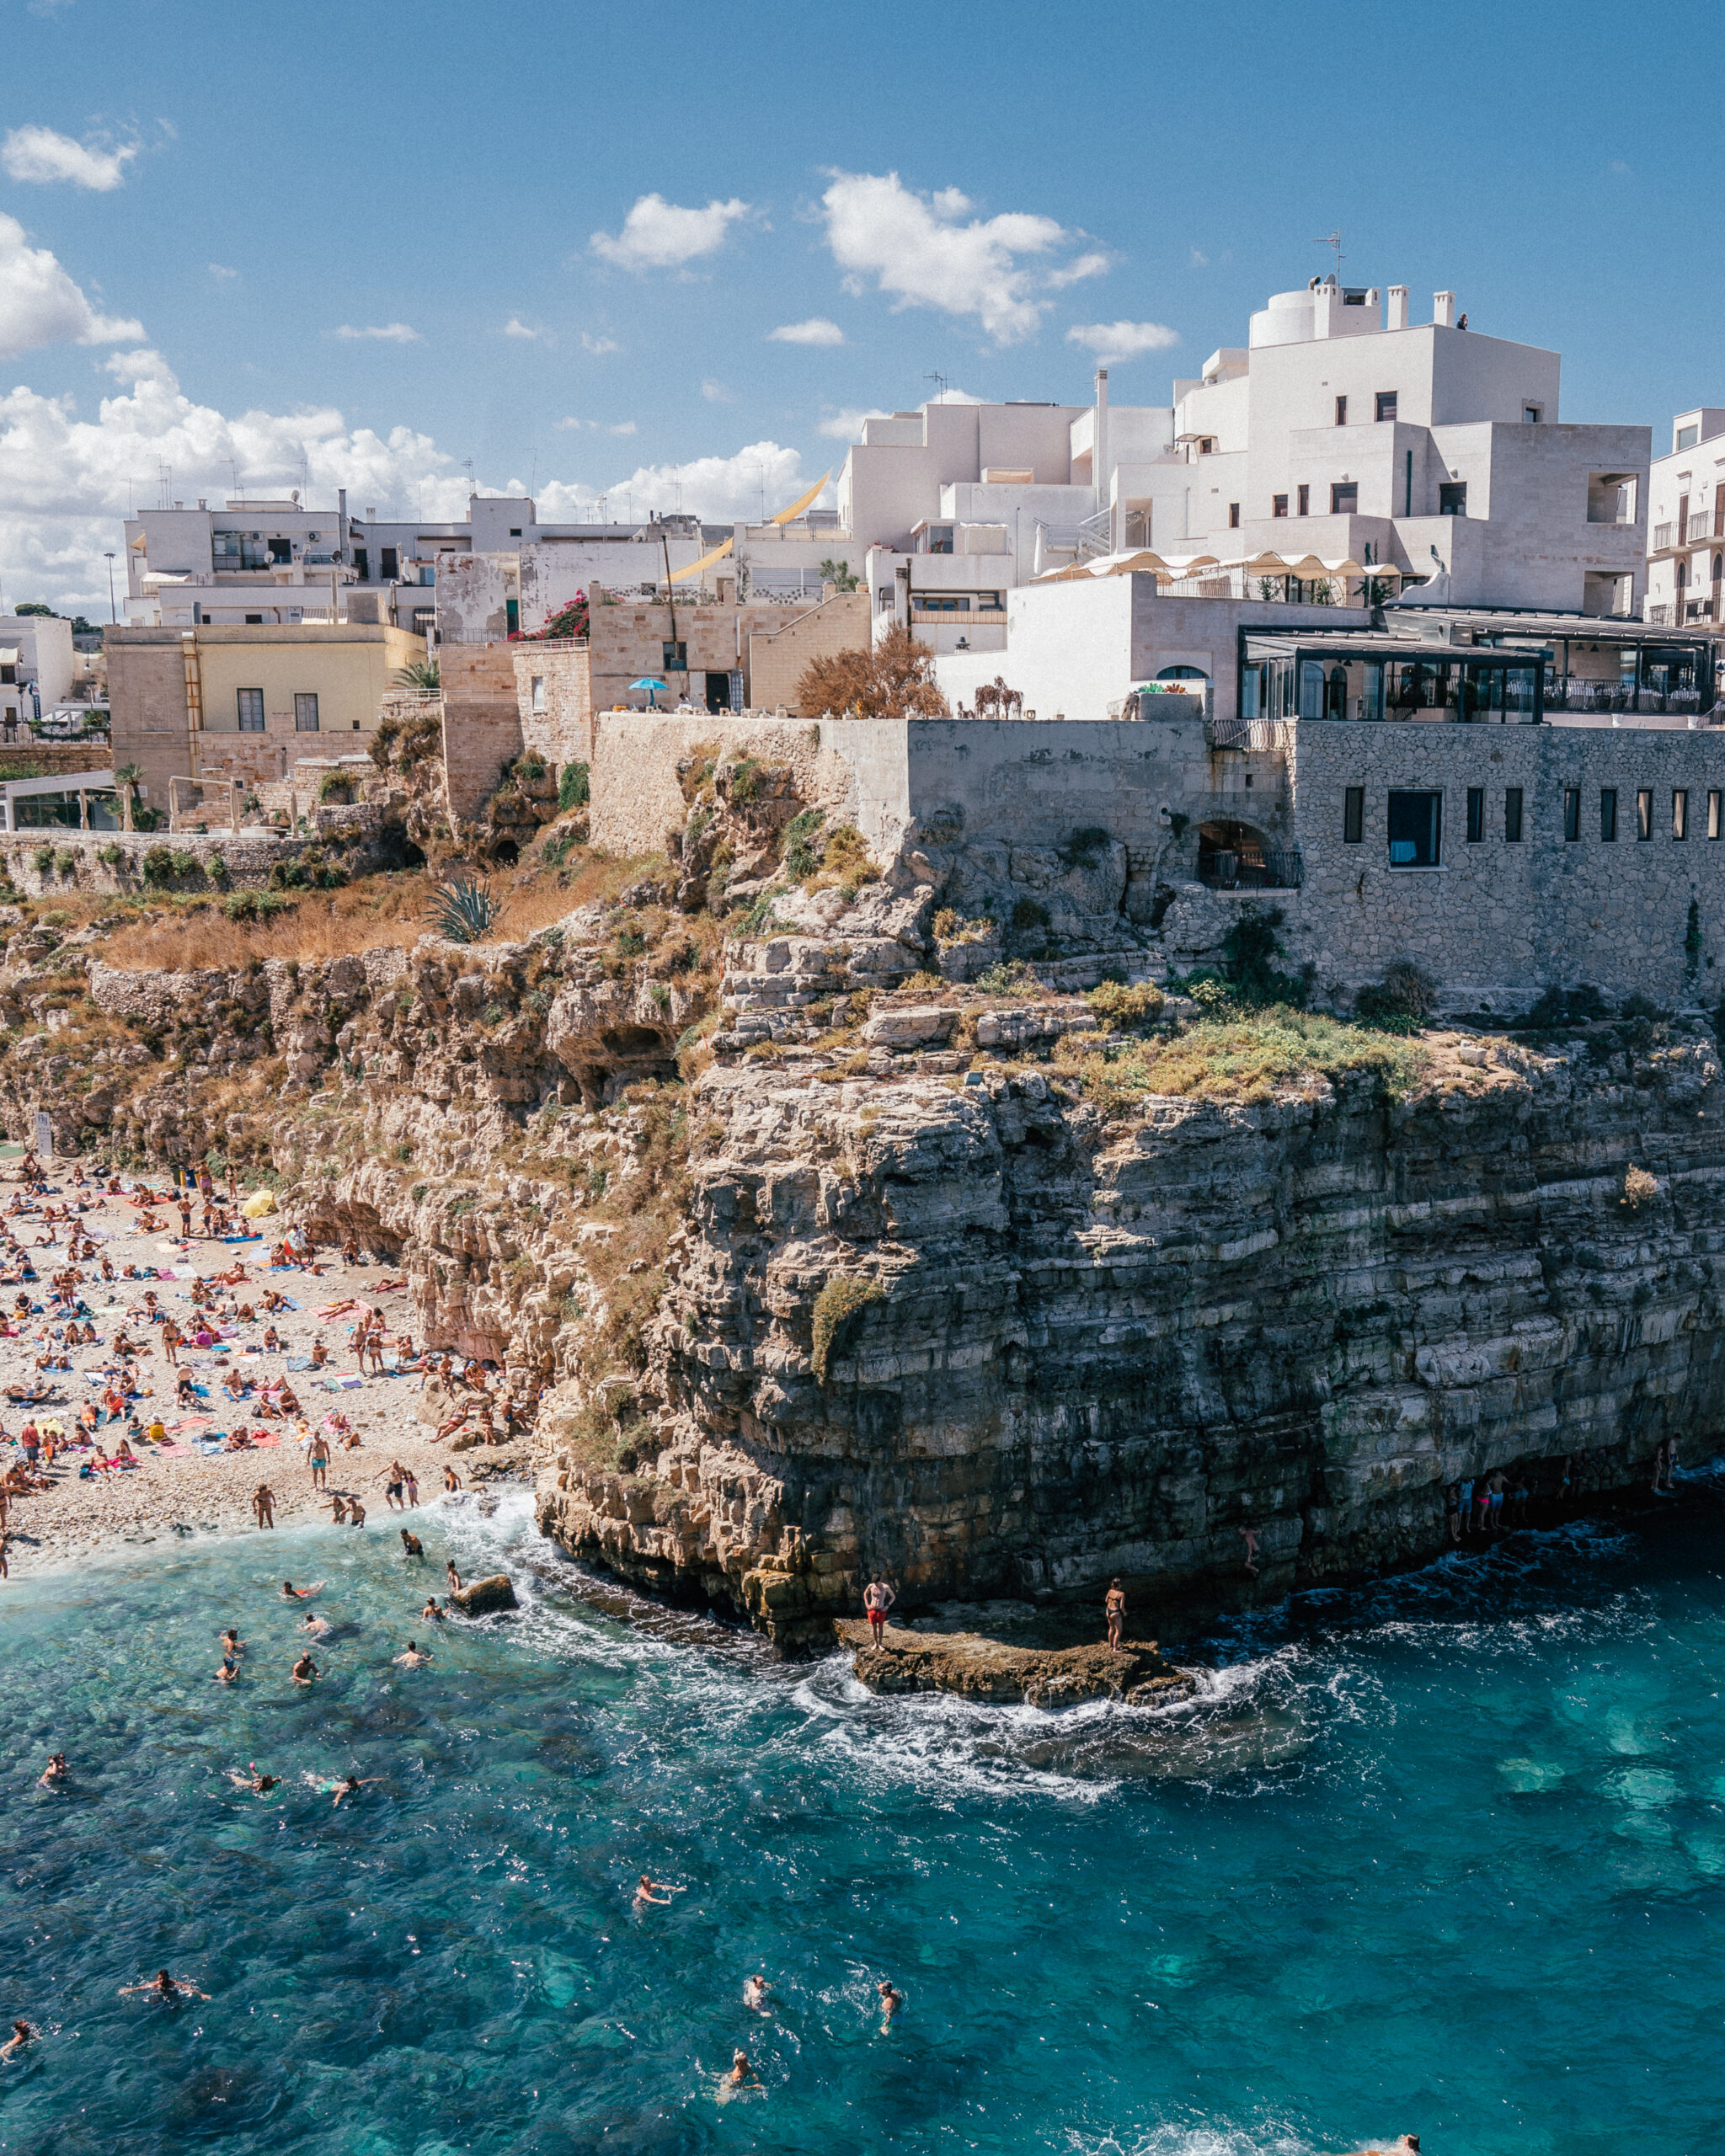 The ultimate guide to traveling to Puglia, Italy including the best towns, beaches, viewpoints, cave restaurants, hotels, day trips and more.